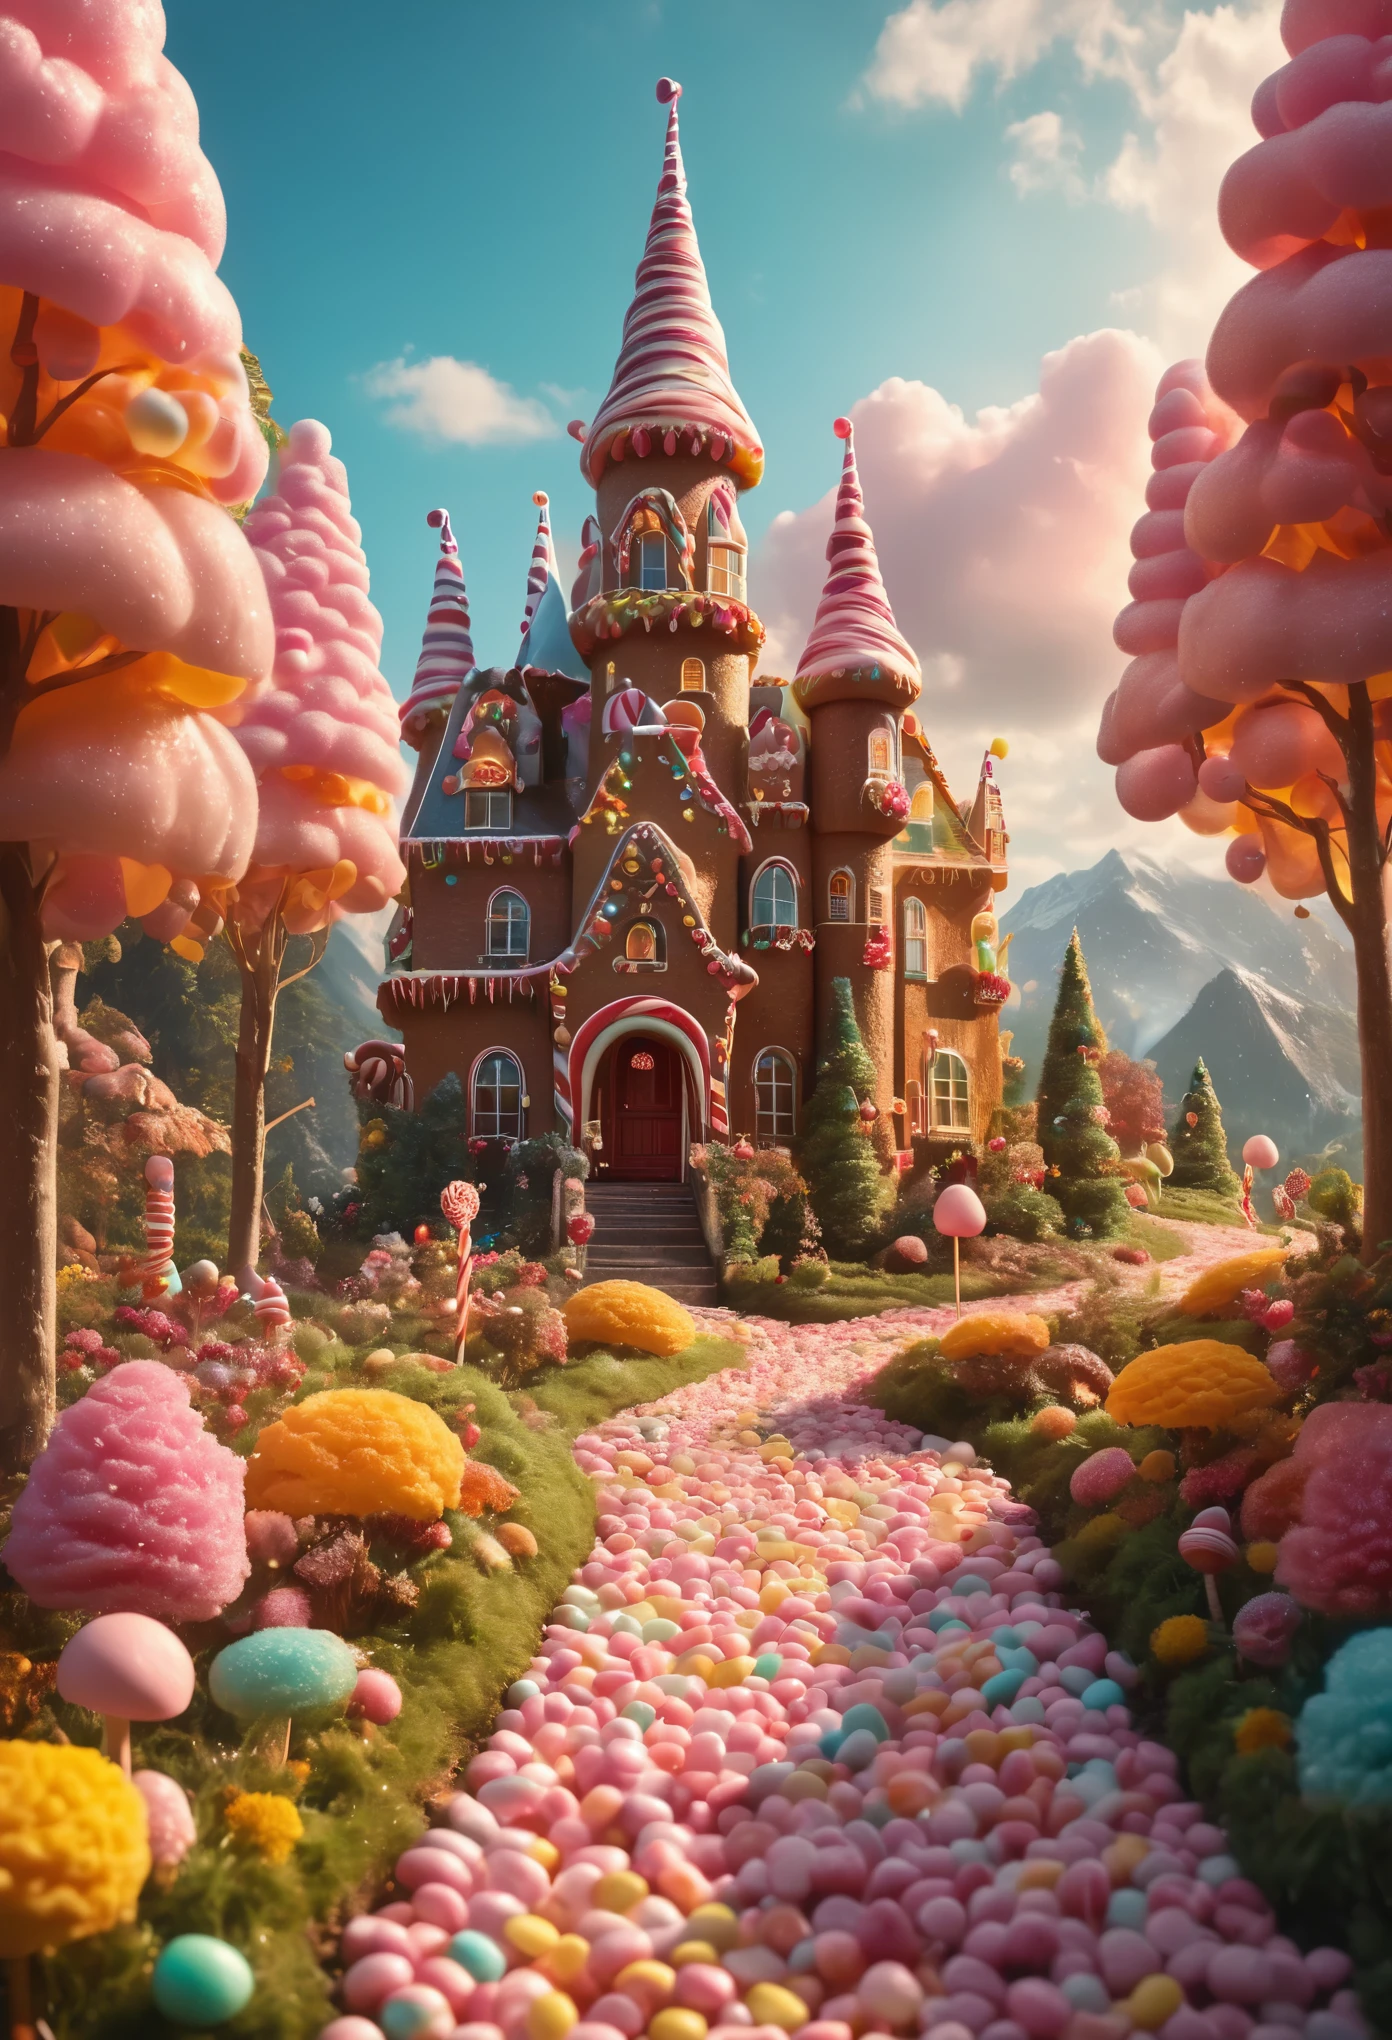 (best quality,4k,8k,highres,masterpiece:1.2),ultra-detailed,(realistic,photorealistic,photo-realistic:1.37),candyland,illustration,colorful,vibrant,whimsical,surreal,fantasy,delicious edibles,marshmallow trees,licorice pathway,gingerbread houses,glowing lollipops,cotton candy clouds,juicy gummy bears,sugar-coated mushrooms,sparkling chocolate river,caramel slides,candy cane flowers,enchanted castle made of candy,playful fairies,children laughing and playing,golden sunshine,soft pastel colors,magical atmosphere.